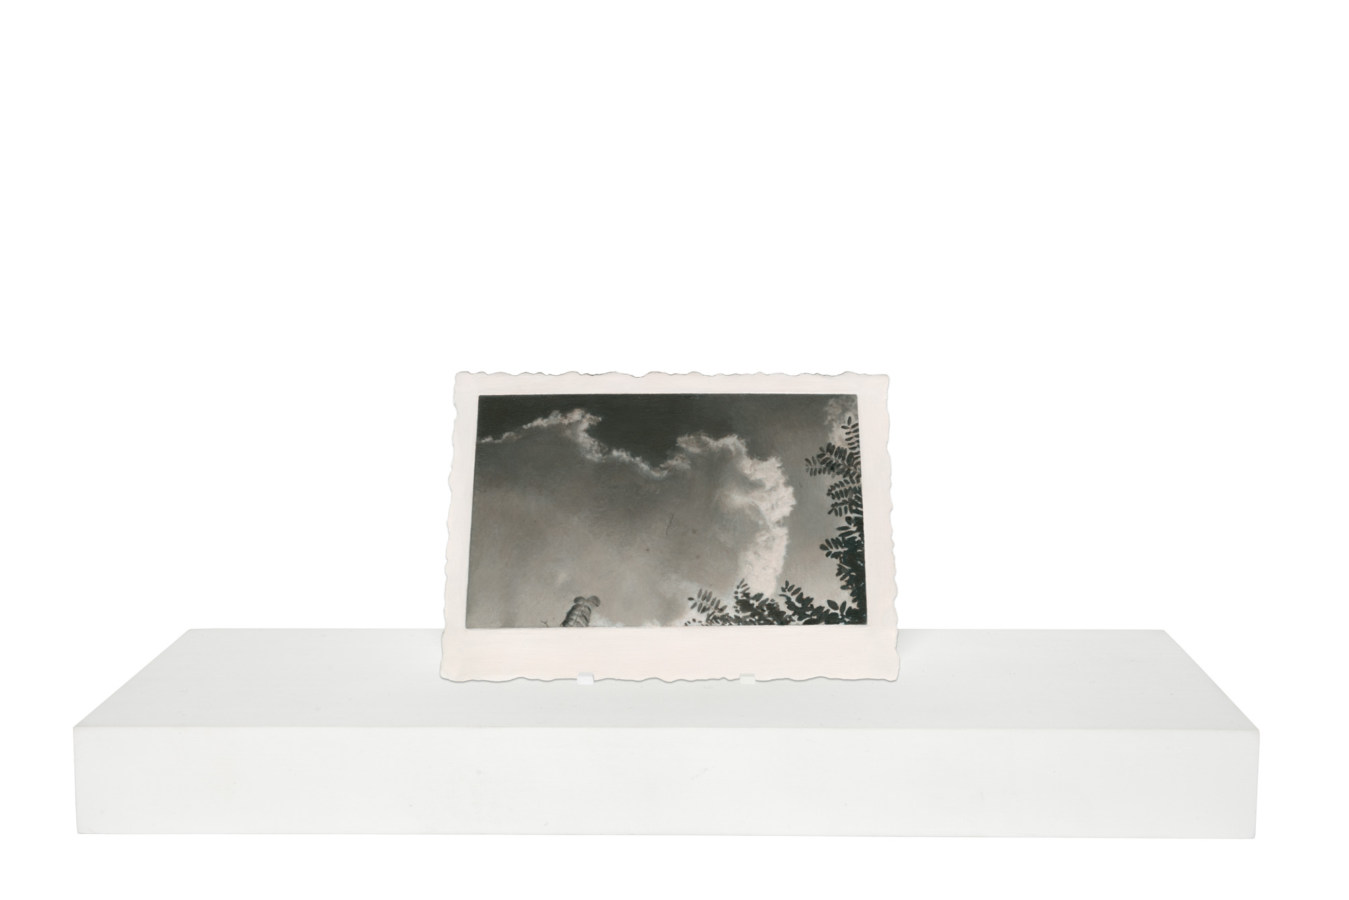 Painting of clouds and tips of tree branches on a wooden stand